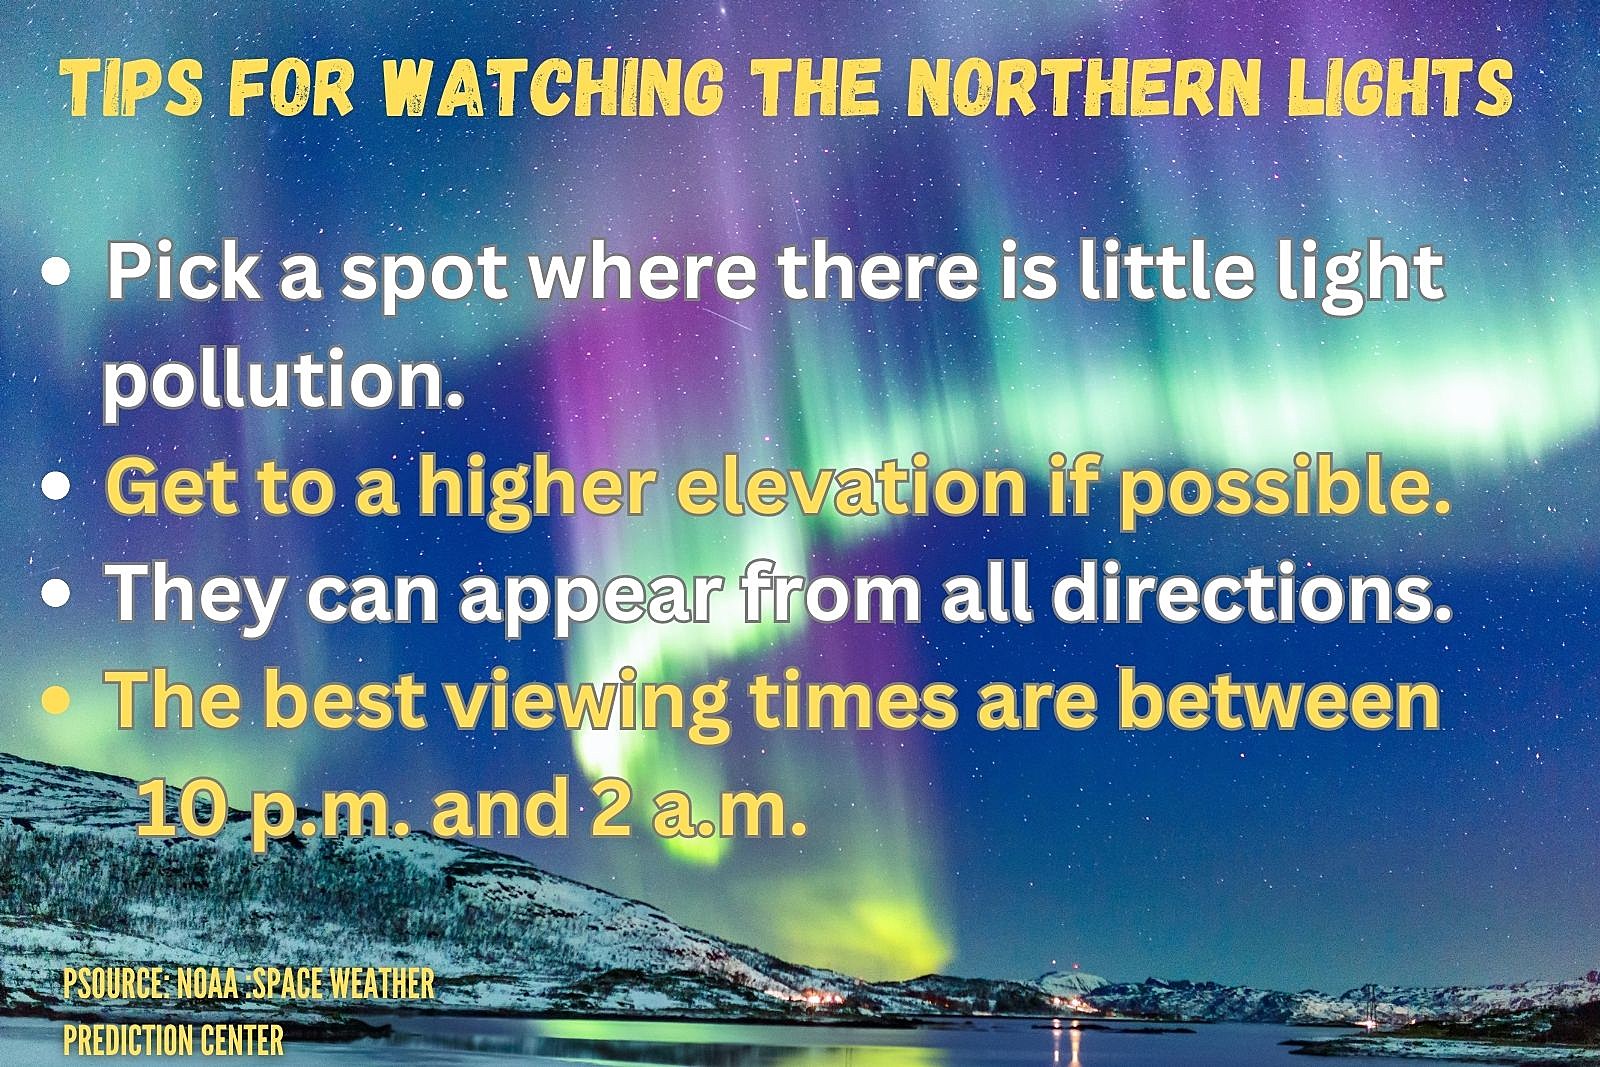 Tips for watching the Northern Lights